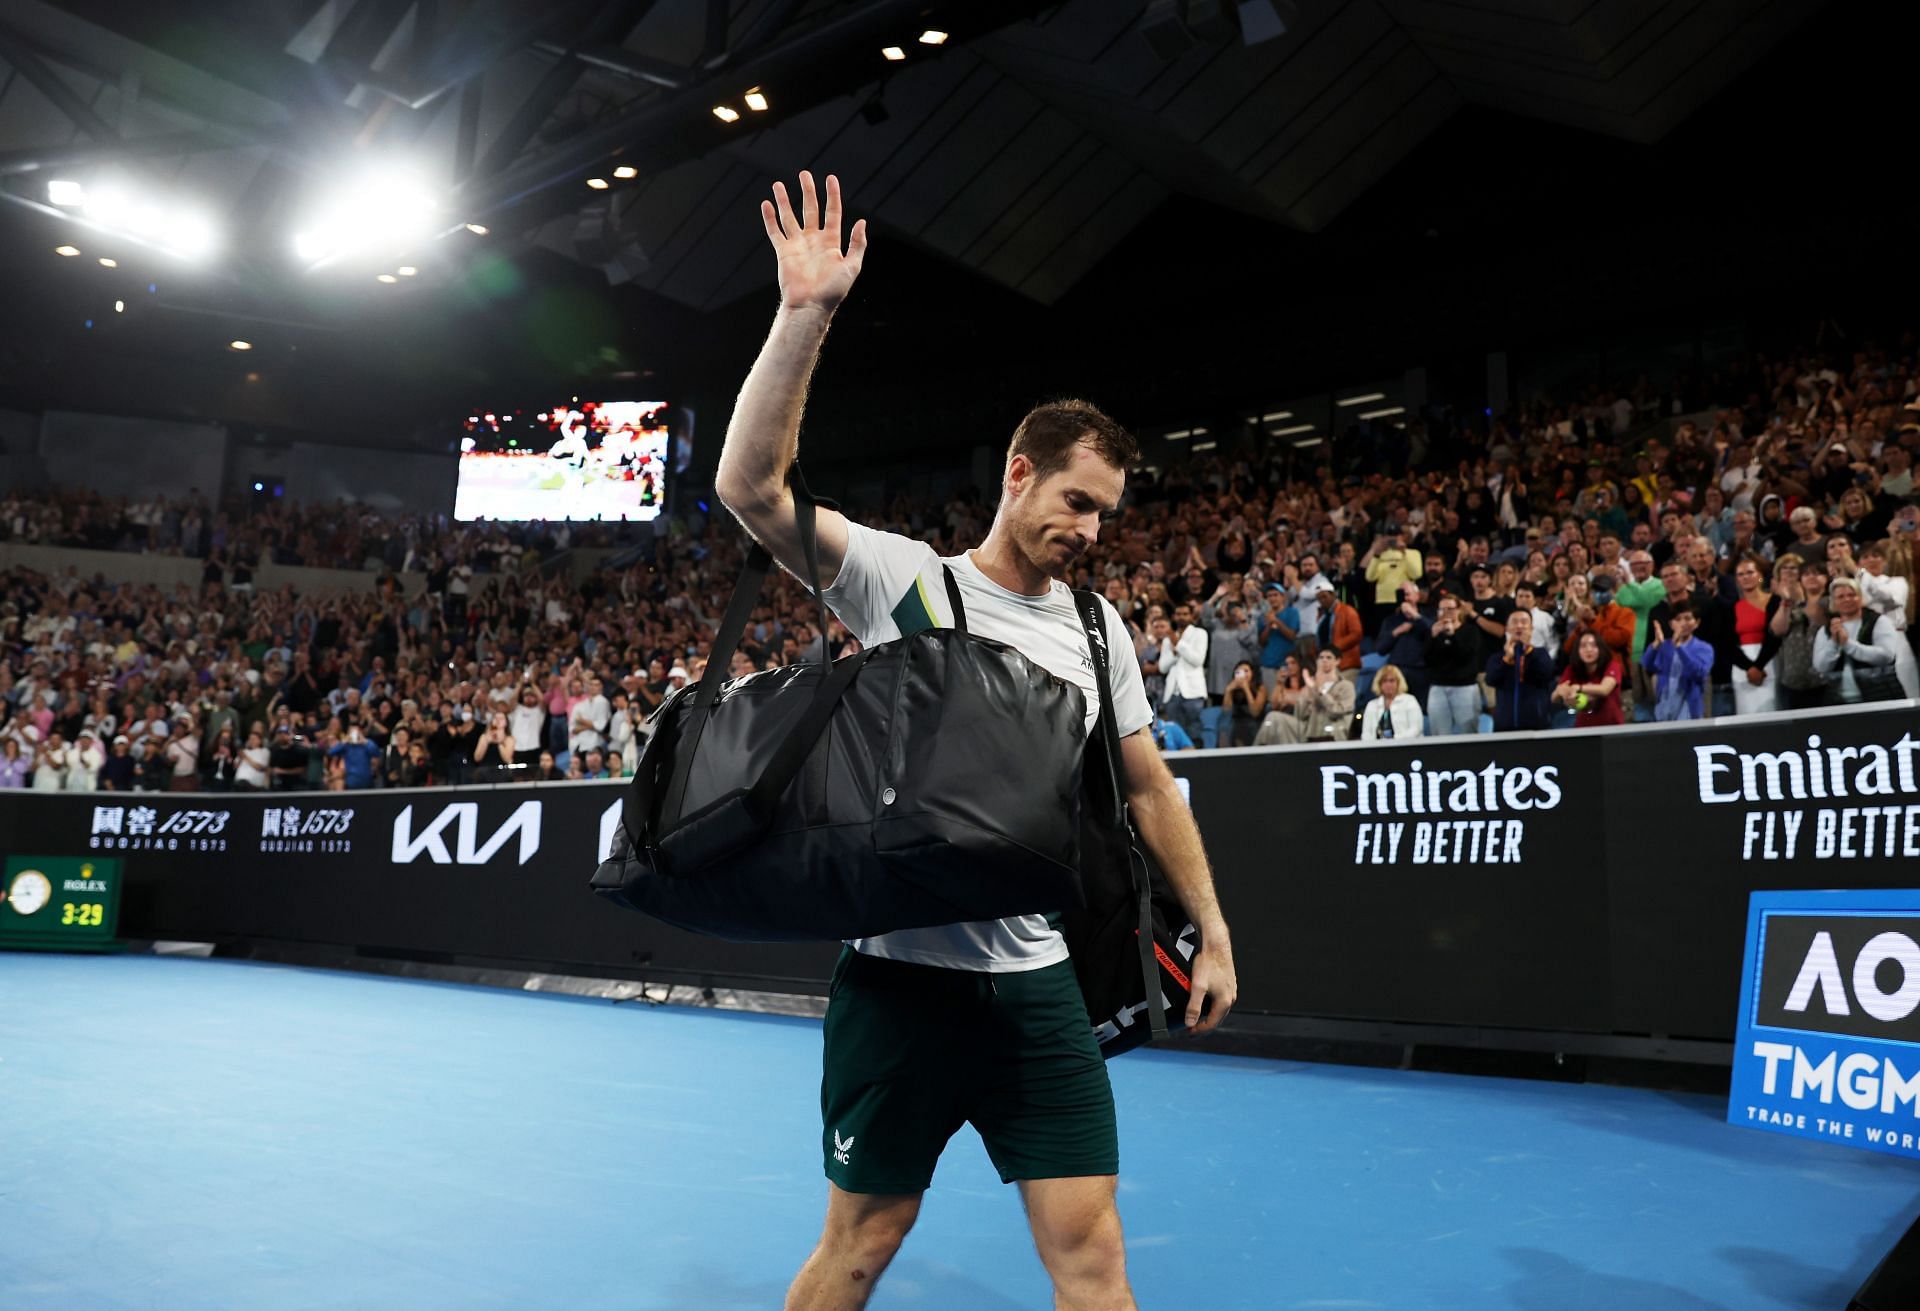 Andy Murray received a standing ovation on Saturday